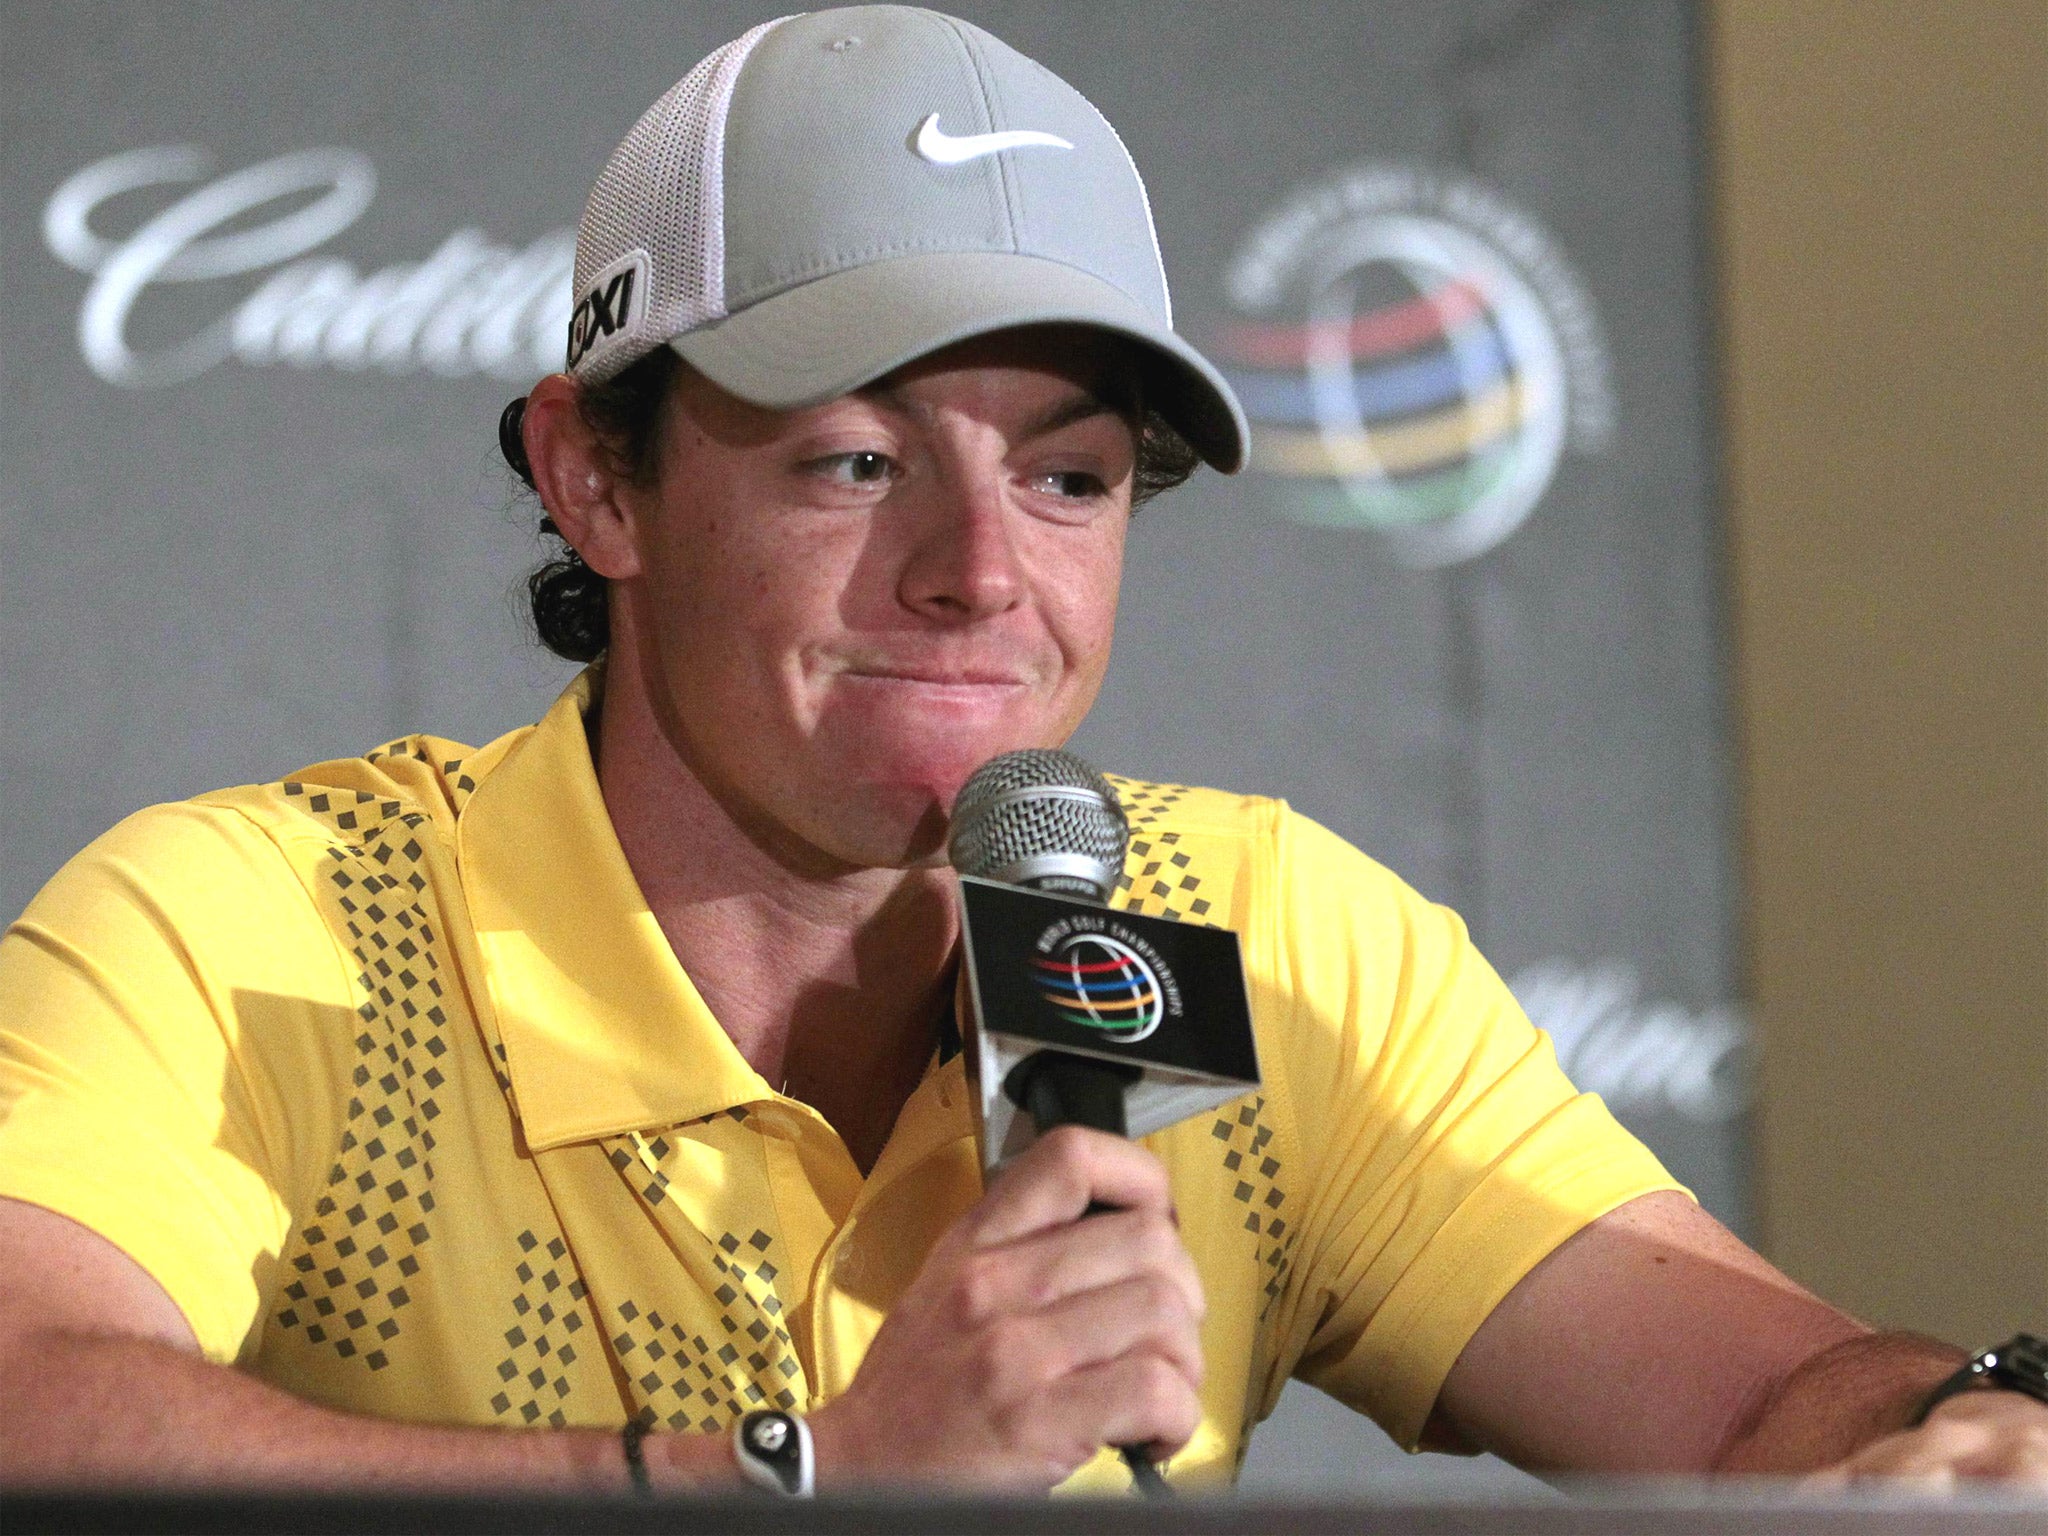 Rory McIlroy faces the press in Miami, for the first time since quitting the Honda Classic